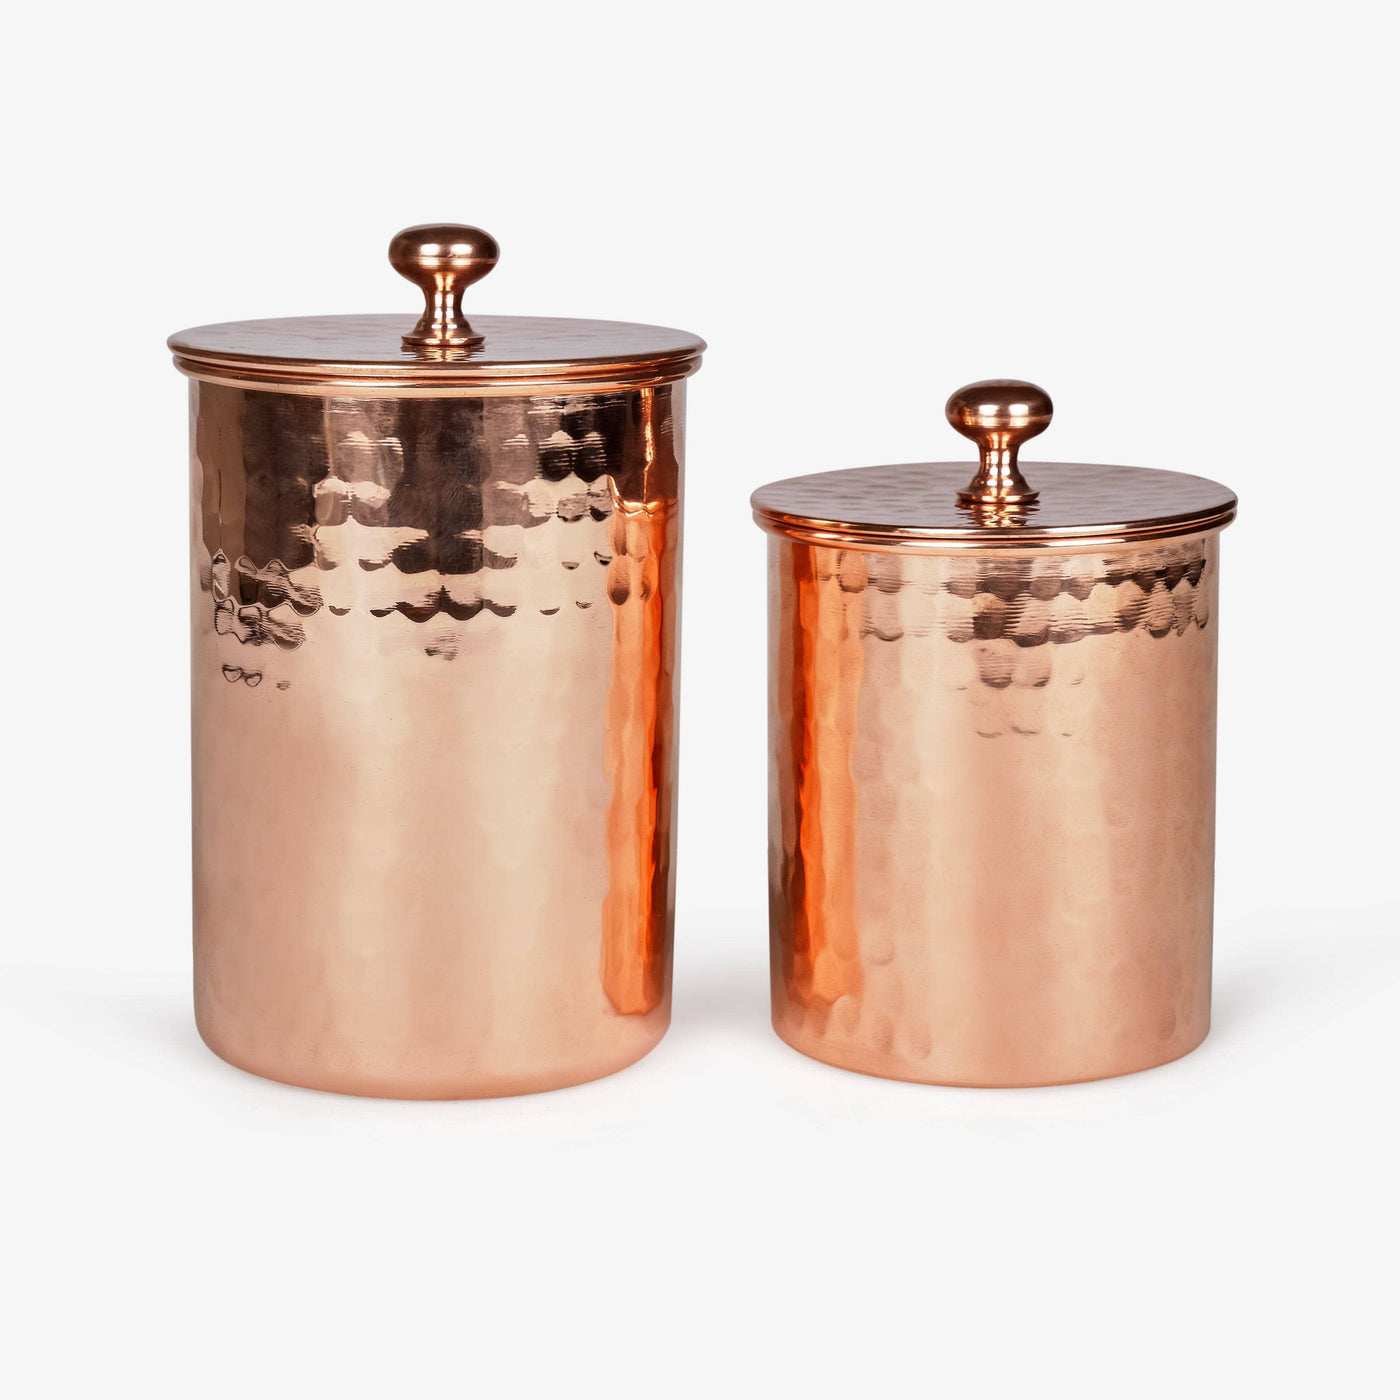 Penny Hammered Copper Spice Jar, Copper Kitchen Accessories sazy.com